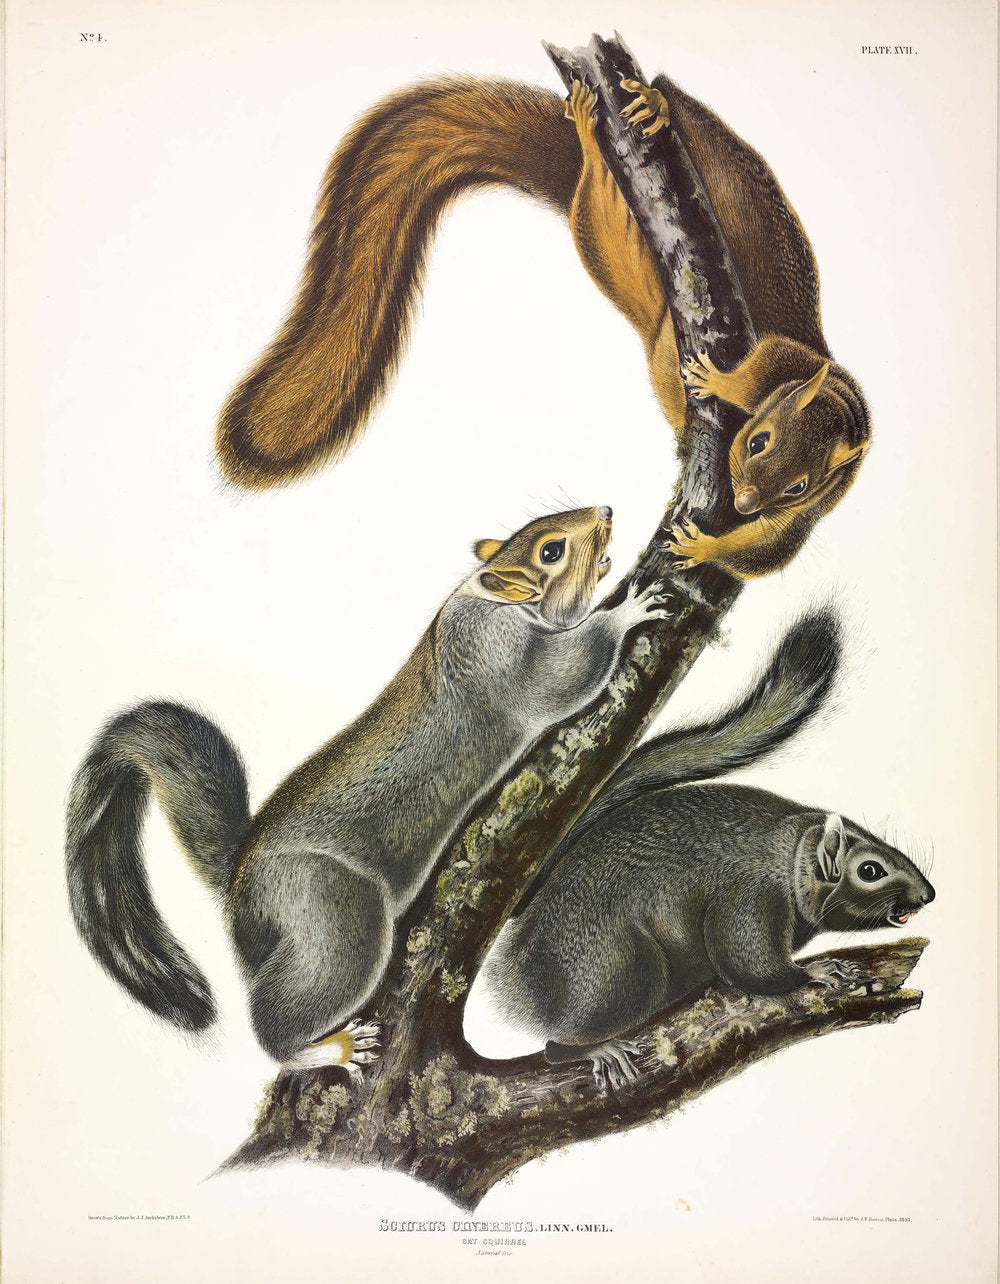 Painted by John James Audubon (1785-1851) with background likely by Victor Gifford Audubon (1809-1860)  Plate XVII - Cat Squirrel  From: Viviparous Quadrupeds of North America  New York: 1845-1848  Hand colored lithograph  Sheet size: 21 ¼” x 27”